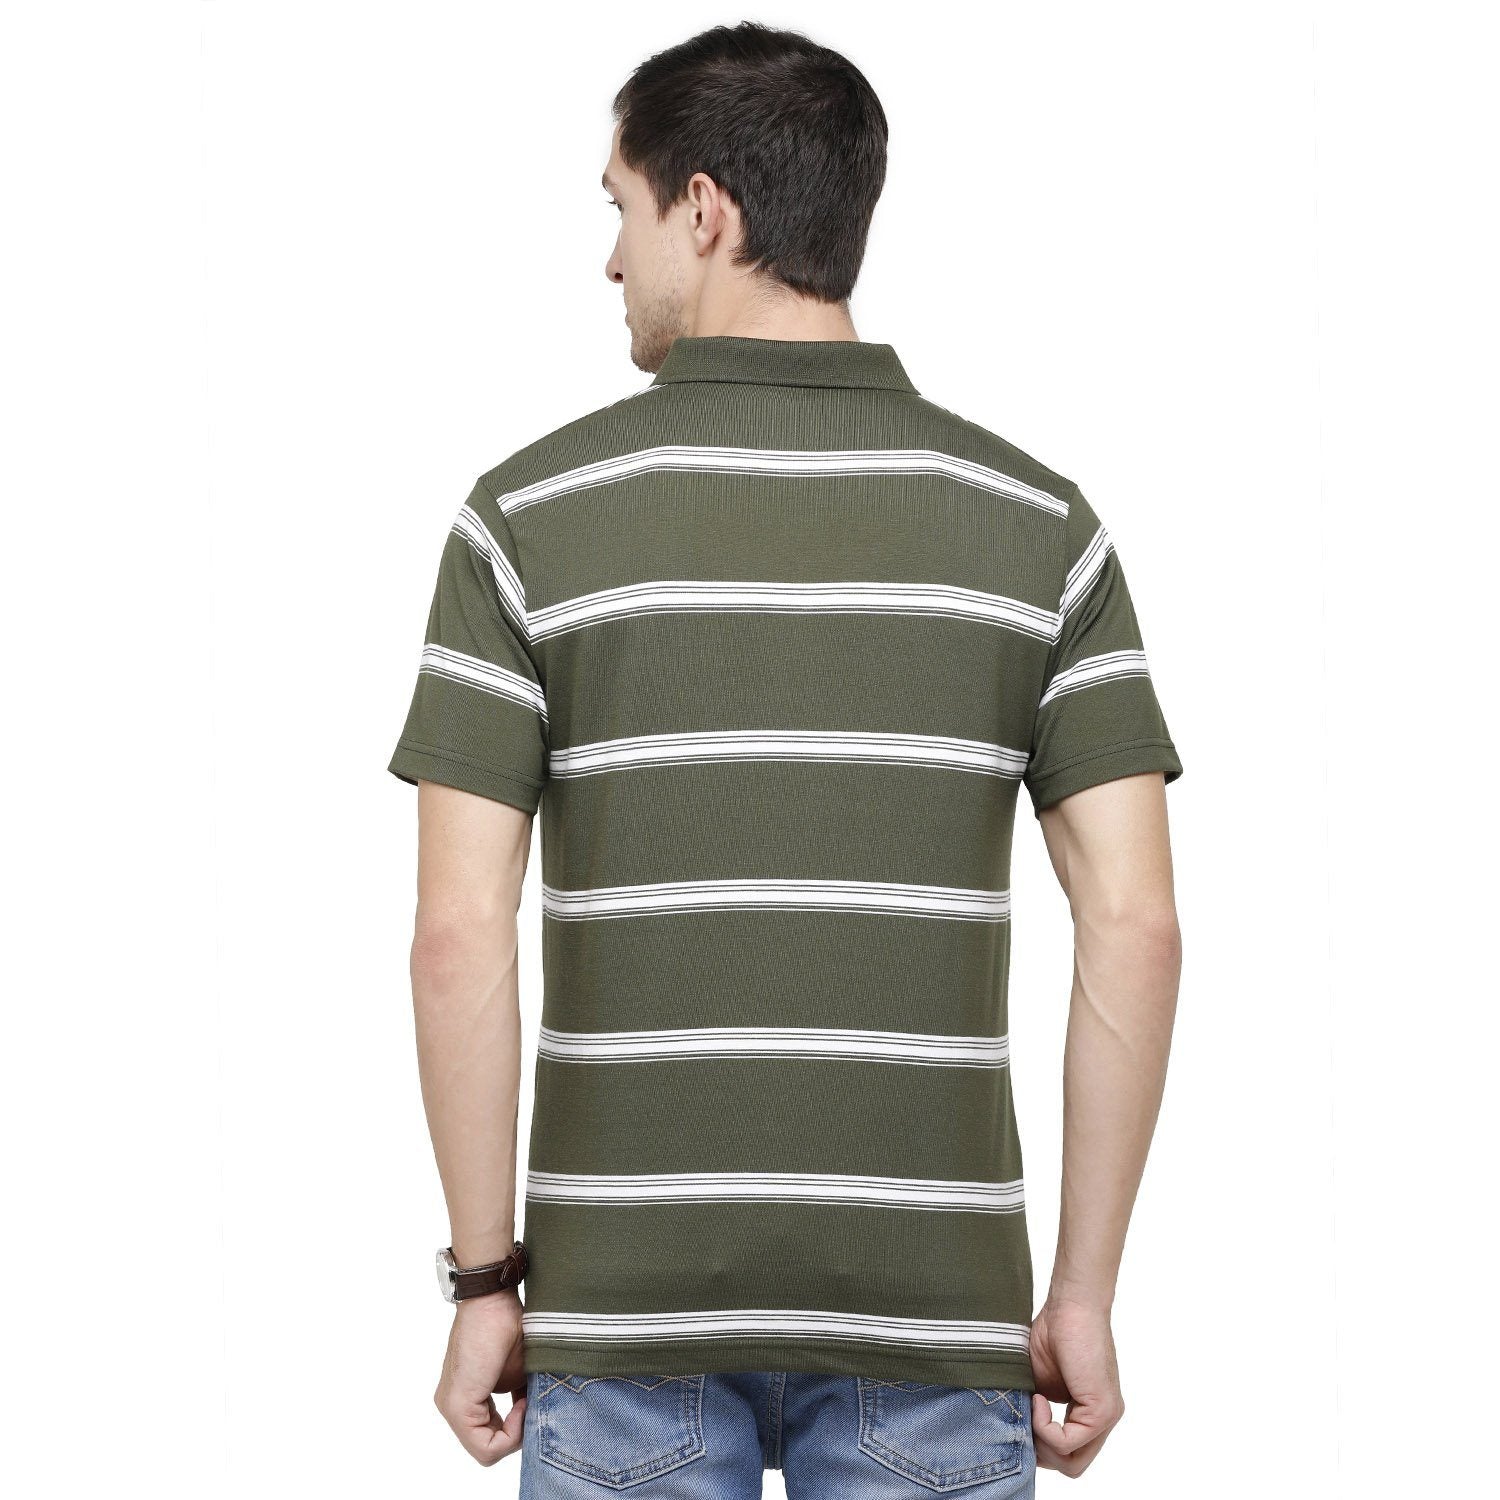 Classic Polo Mens Striped Polo Neck Half Sleeve Regular Fit Cotton Polyester Blend Olive Green Fashion T-Shirt ( AVON - 460 B AF P ) T-shirt Classic Polo 